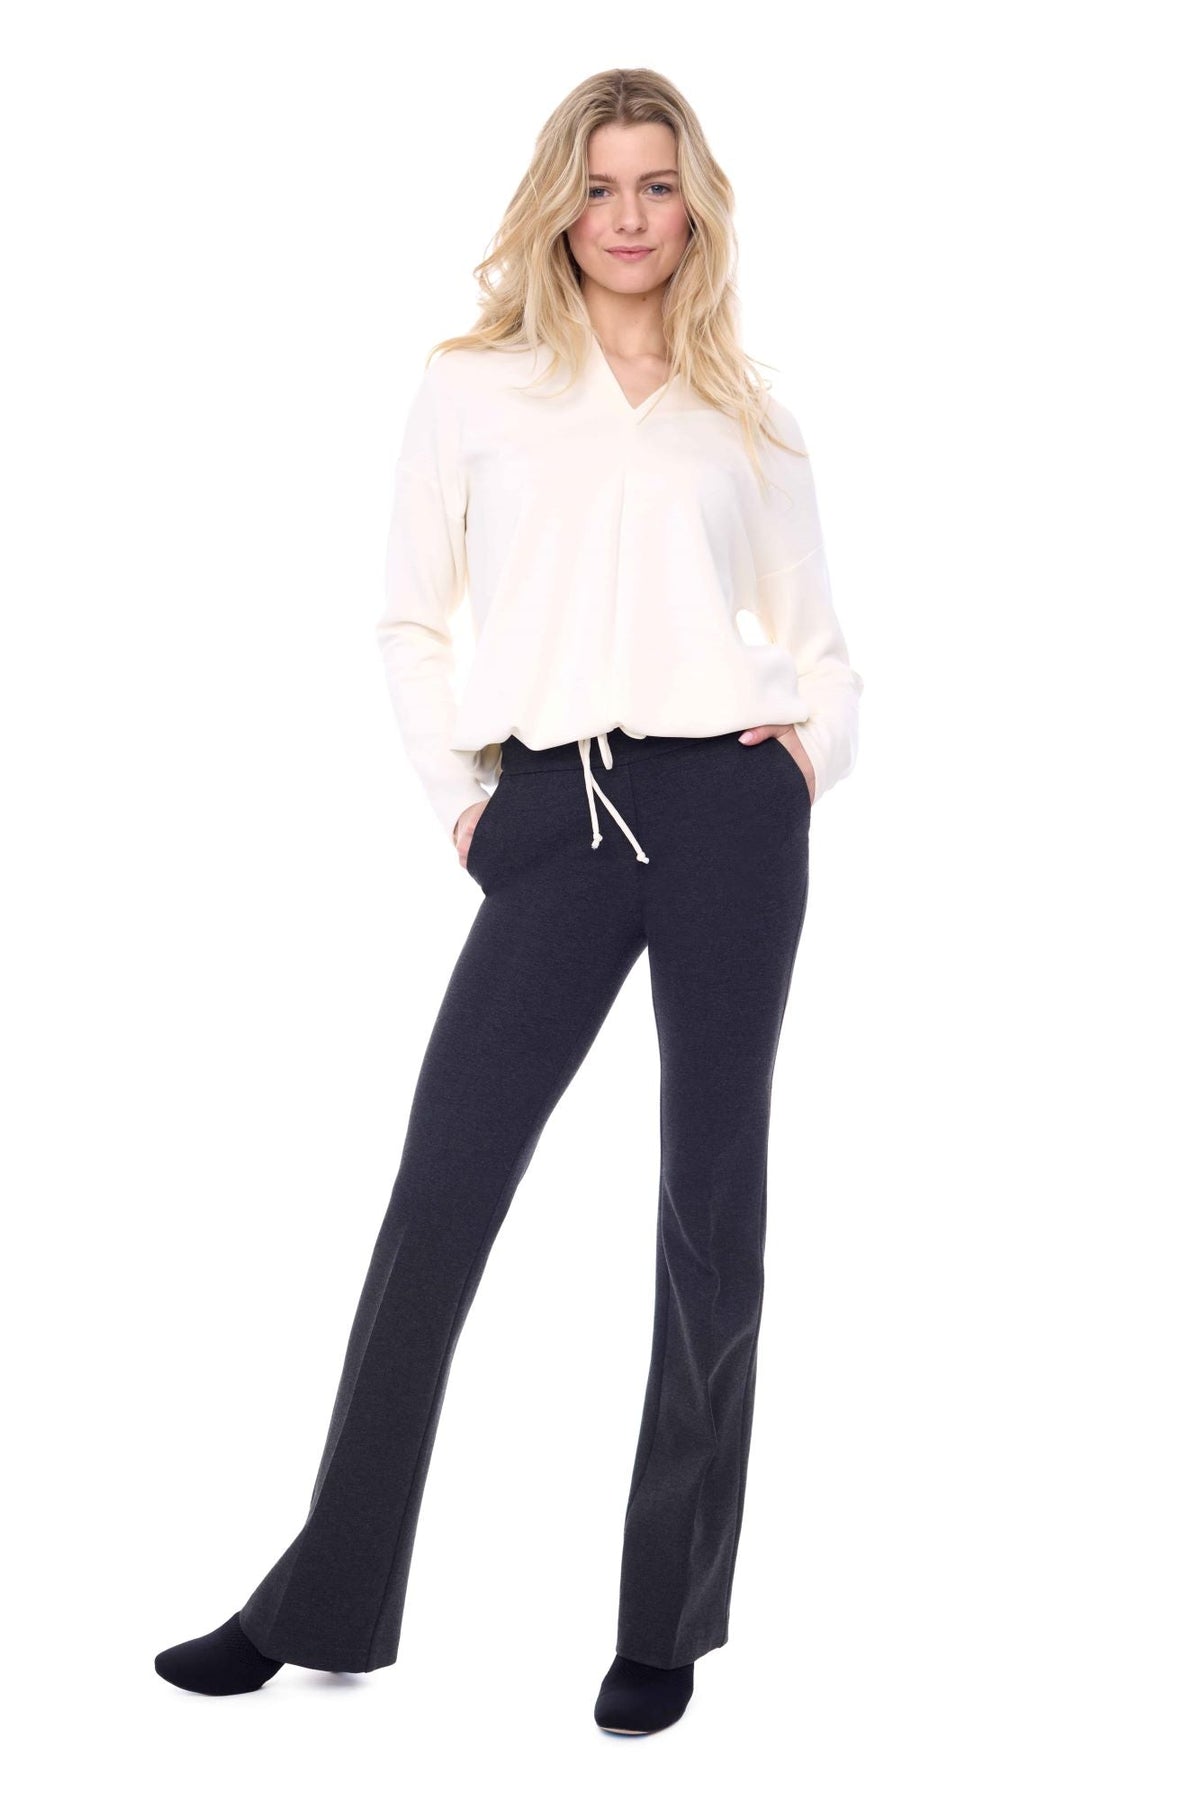 Lululemon Align Super-High-Rise Pant 28 Black Size 4 - $65 (33% Off  Retail) - From Abby